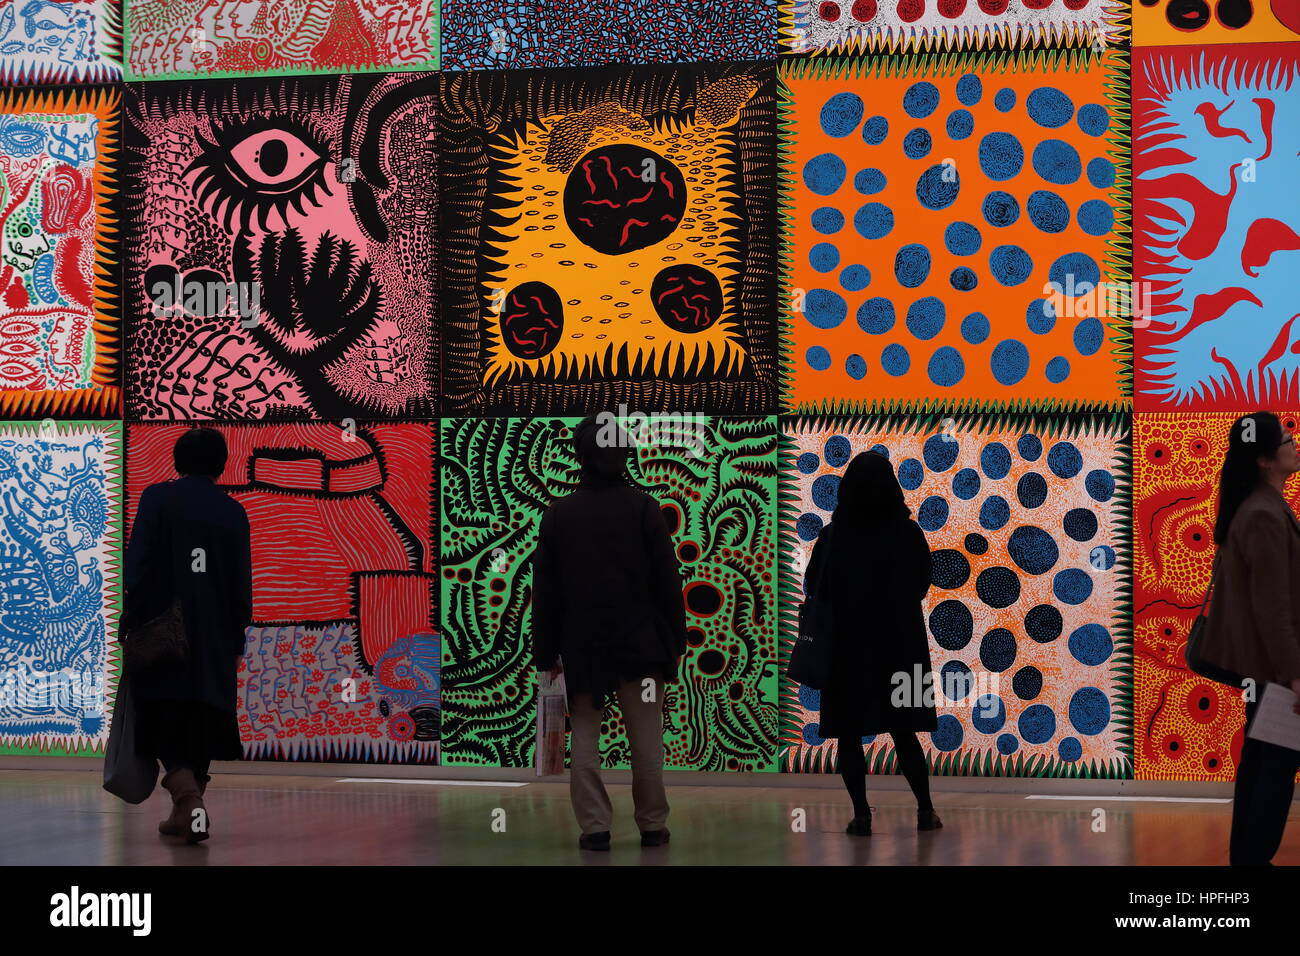 Tokyo, Japan. 21st Feb, 2017. Japanese artist Yayoi Kusama attends the exhibition of 'Yayoi Kusama: My Eternal Soul' during press preview day at The National Art Center in Tokyo, Japan on February 21, 2017. Credit: Motoo Naka/AFLO/Alamy Live News Stock Photo